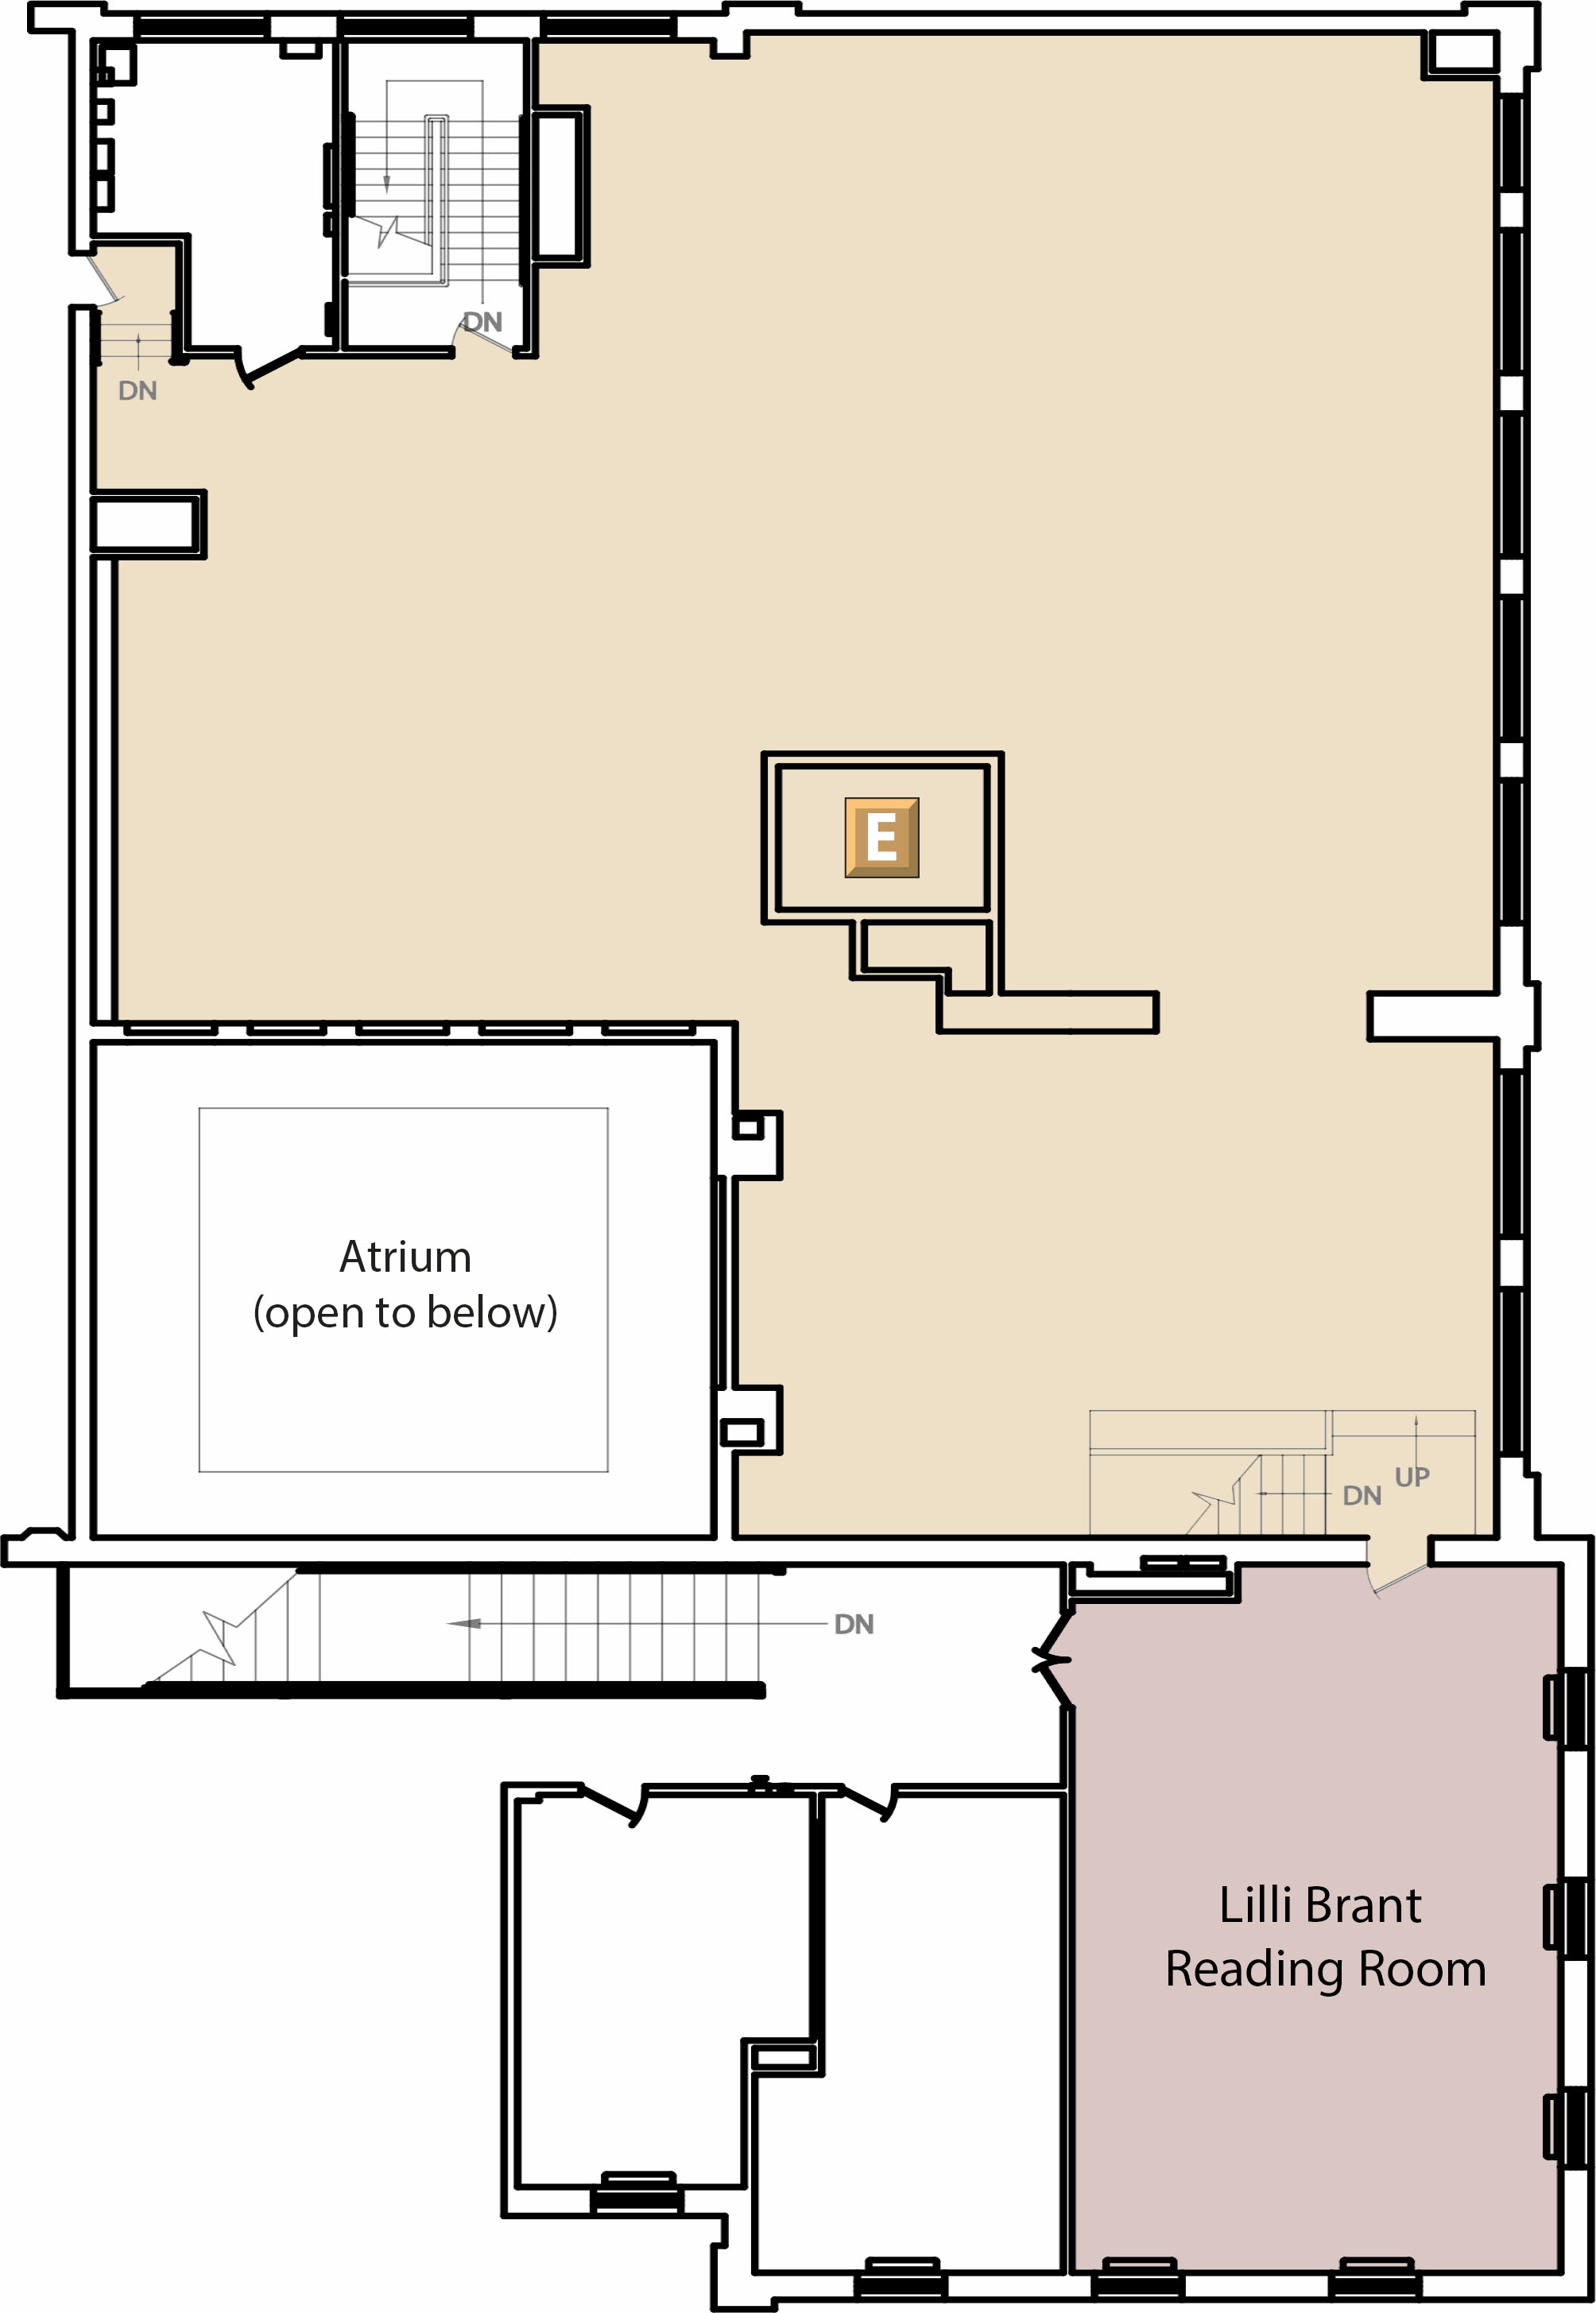 The Third Floor map is a map of the DeLaMare Library at the University of Nevada, Reno main campus showing all of the rooms and features of the Third Floor of the DeLaMare Library.  Getting to the Third floor of the DeLaMare Library The third floor of the DeLaMare Library includes an entrance facing north and south. There is an elevator in the middle of the basement, first, and second-floor area and a set of stairs on the north end that leads to the upper floors of the DeLaMare Library. Alternatively, the south end entrance can be accessed from the southern entrance to the DeLaMare Library first floor. There is a set of stairs to the west when entering the south entrance that leads to the Lilli Brant Reading Room and is connected to the rest of the third floor.  Features of the Third Floor A public elevator located in the center of the third-floor area.  The Atrium is open to below (first floor) and is southwest of the second floor.  On the south end of the third floor, there is an alternative staircase that leads down to the second floor.  Adjacent to the staircase in the south end of the third floor is the Lilli Brant Reading Room which has an exit to the first floor.